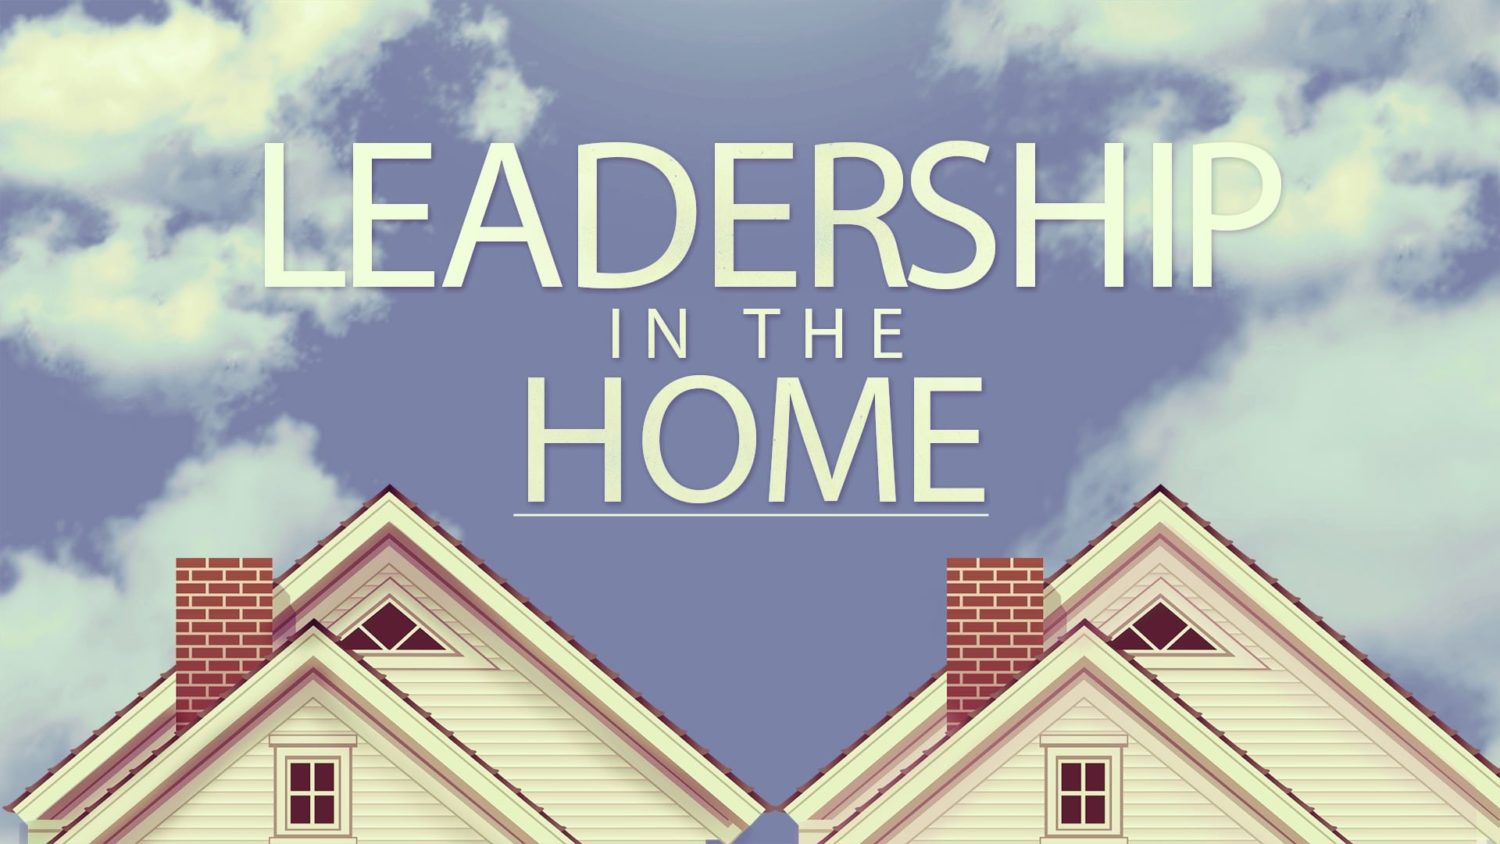 Featured image for “Leadership in The Home”